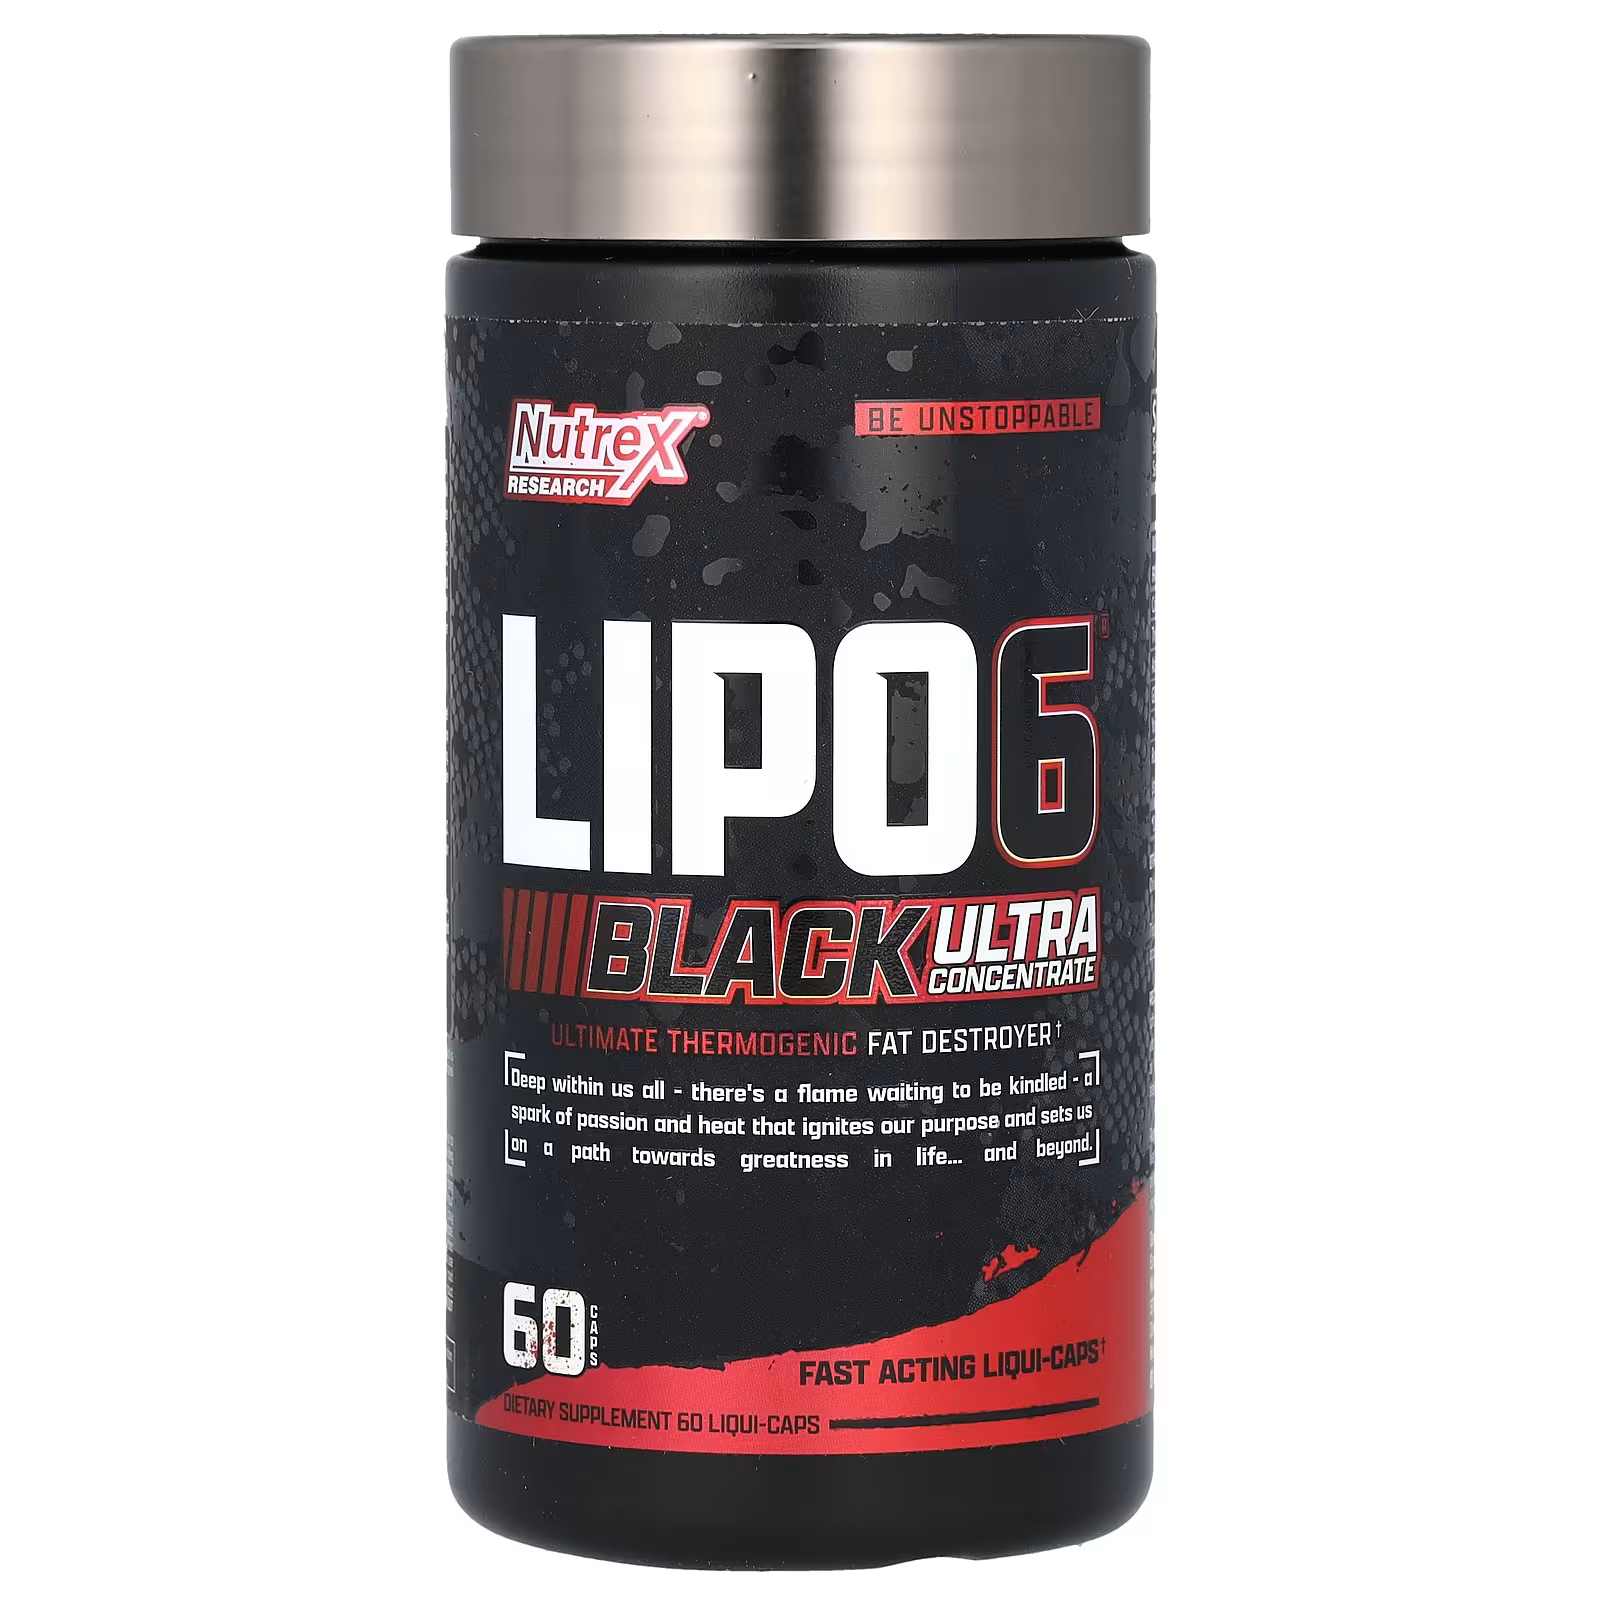 Пищевая добавка Nutrex Research LIPO-6 Black Ultra Concentrate, 60 капсул lipo 6 black ultra concentrate fat destroyer 60cap